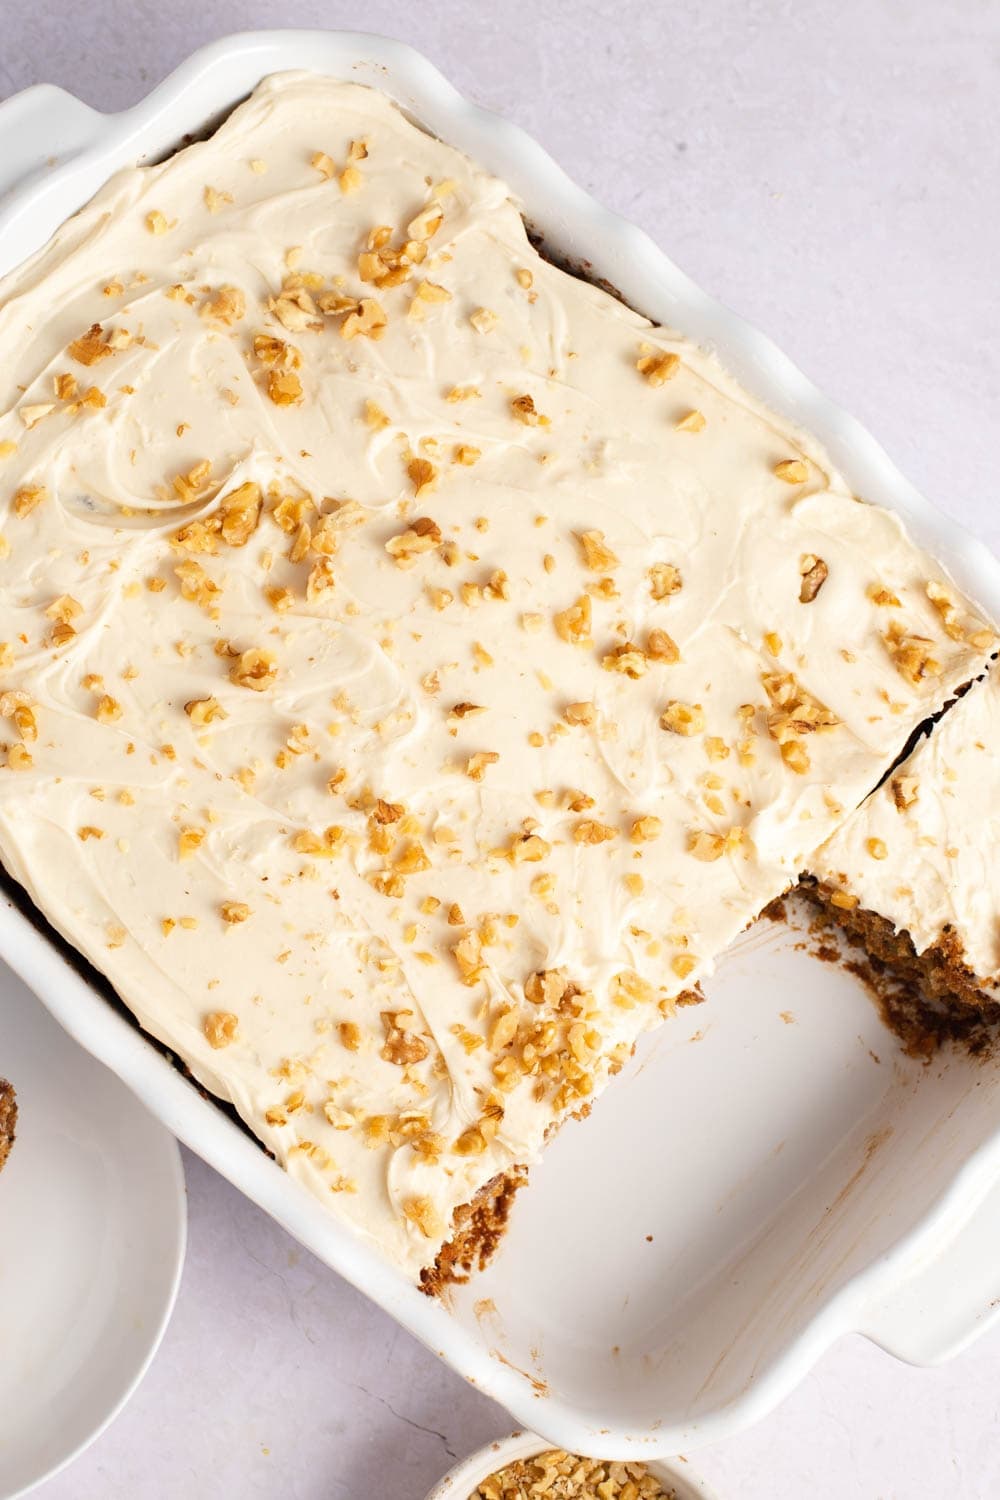 Carrot Cake with cream frosting and chopped walnuts.